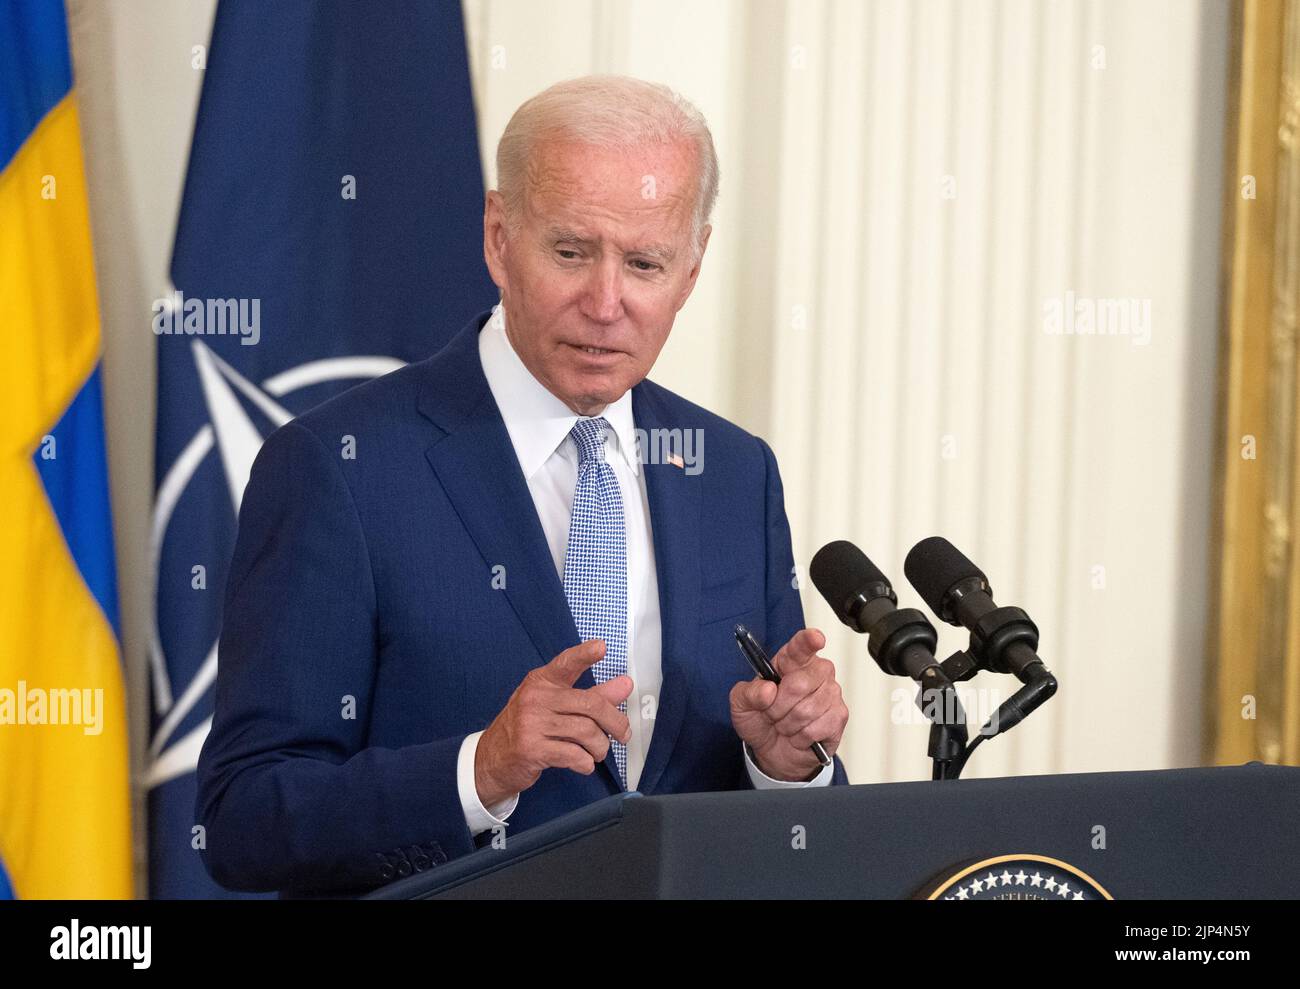 Washington, United States Of America. 09th Aug, 2022. United States President Joe Biden delivers remarks prior to signing the Instruments of Ratification for the Accession Protocols to the North Atlantic Treaty for the Republic of Finland and Kingdom of Sweden in the East Room of the White House in Washington, DC on Tuesday, August 9, 2022. Credit: Ron Sachs/Pool via CNP/AdMedia/Newscom/Alamy Live News Stock Photo